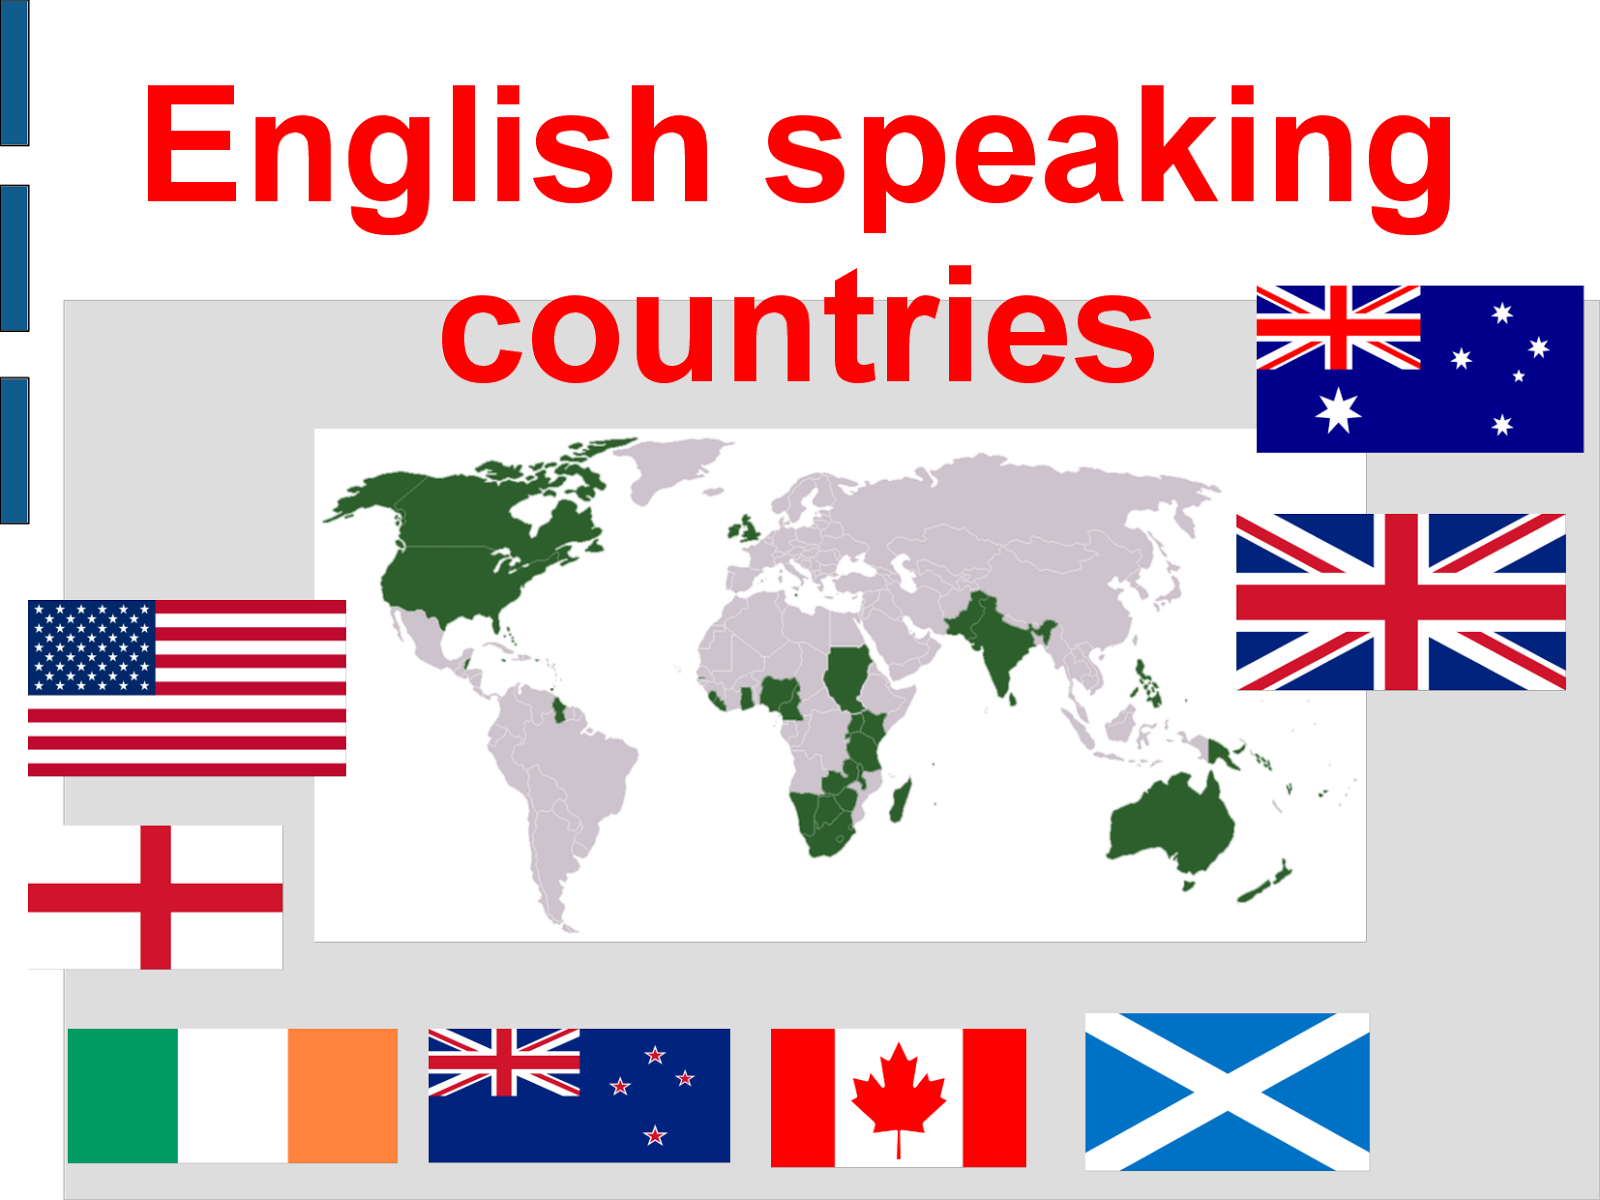 Topic country. English speaking Countries. English speaking Countries презентация. Англоговорящие страны на английском. Англоговорящие страны на карте.